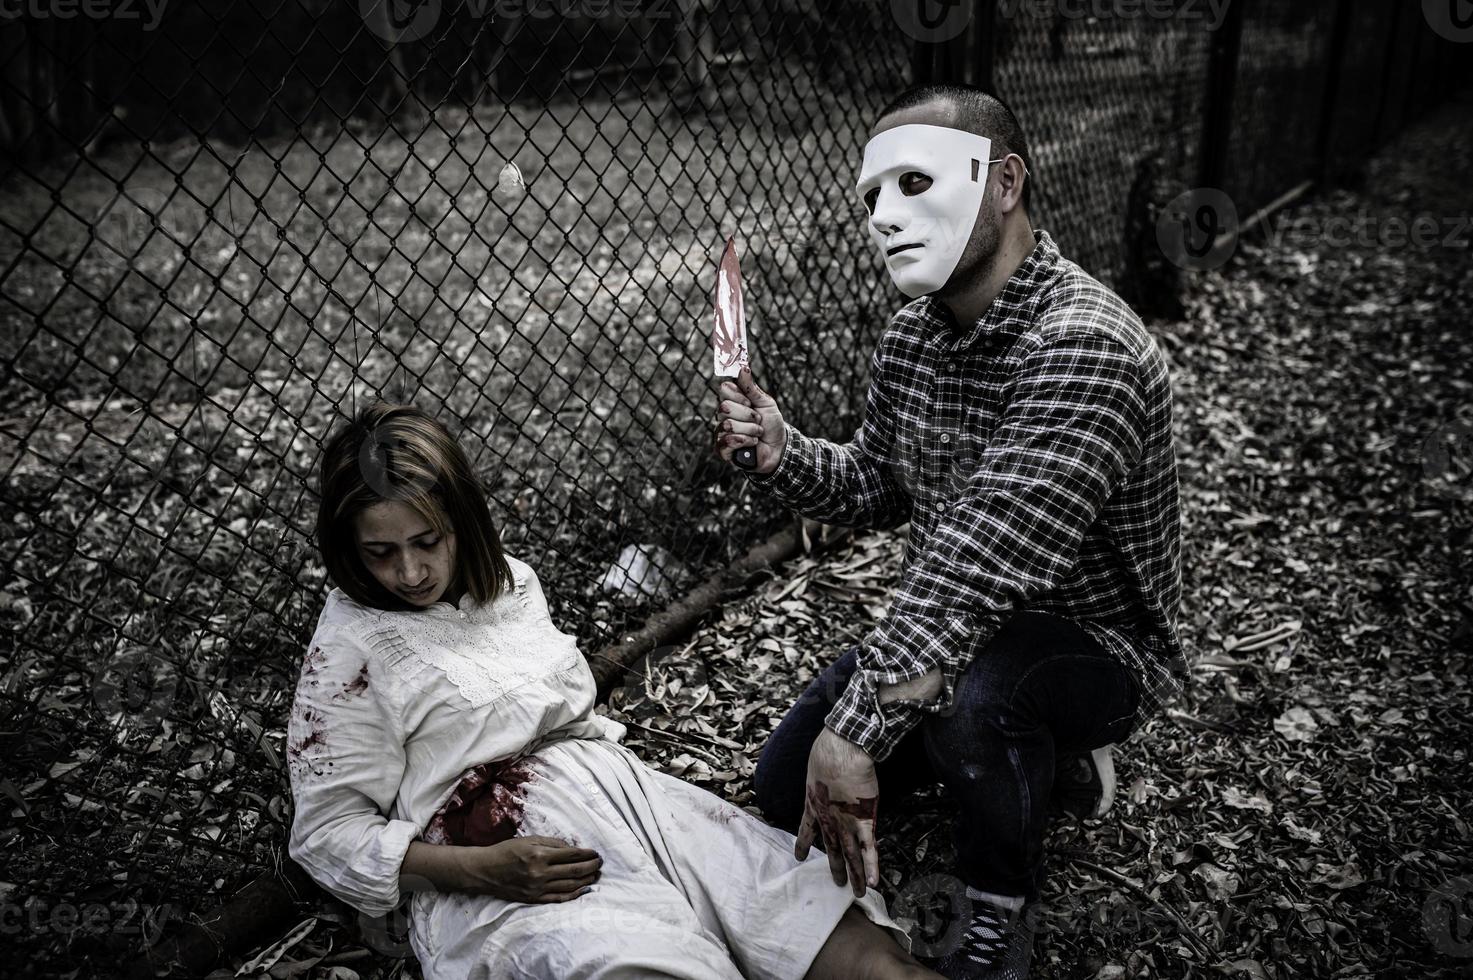 A serial killer scene is about to kill an Asian woman,concept thriller scene,Halloween festival photo